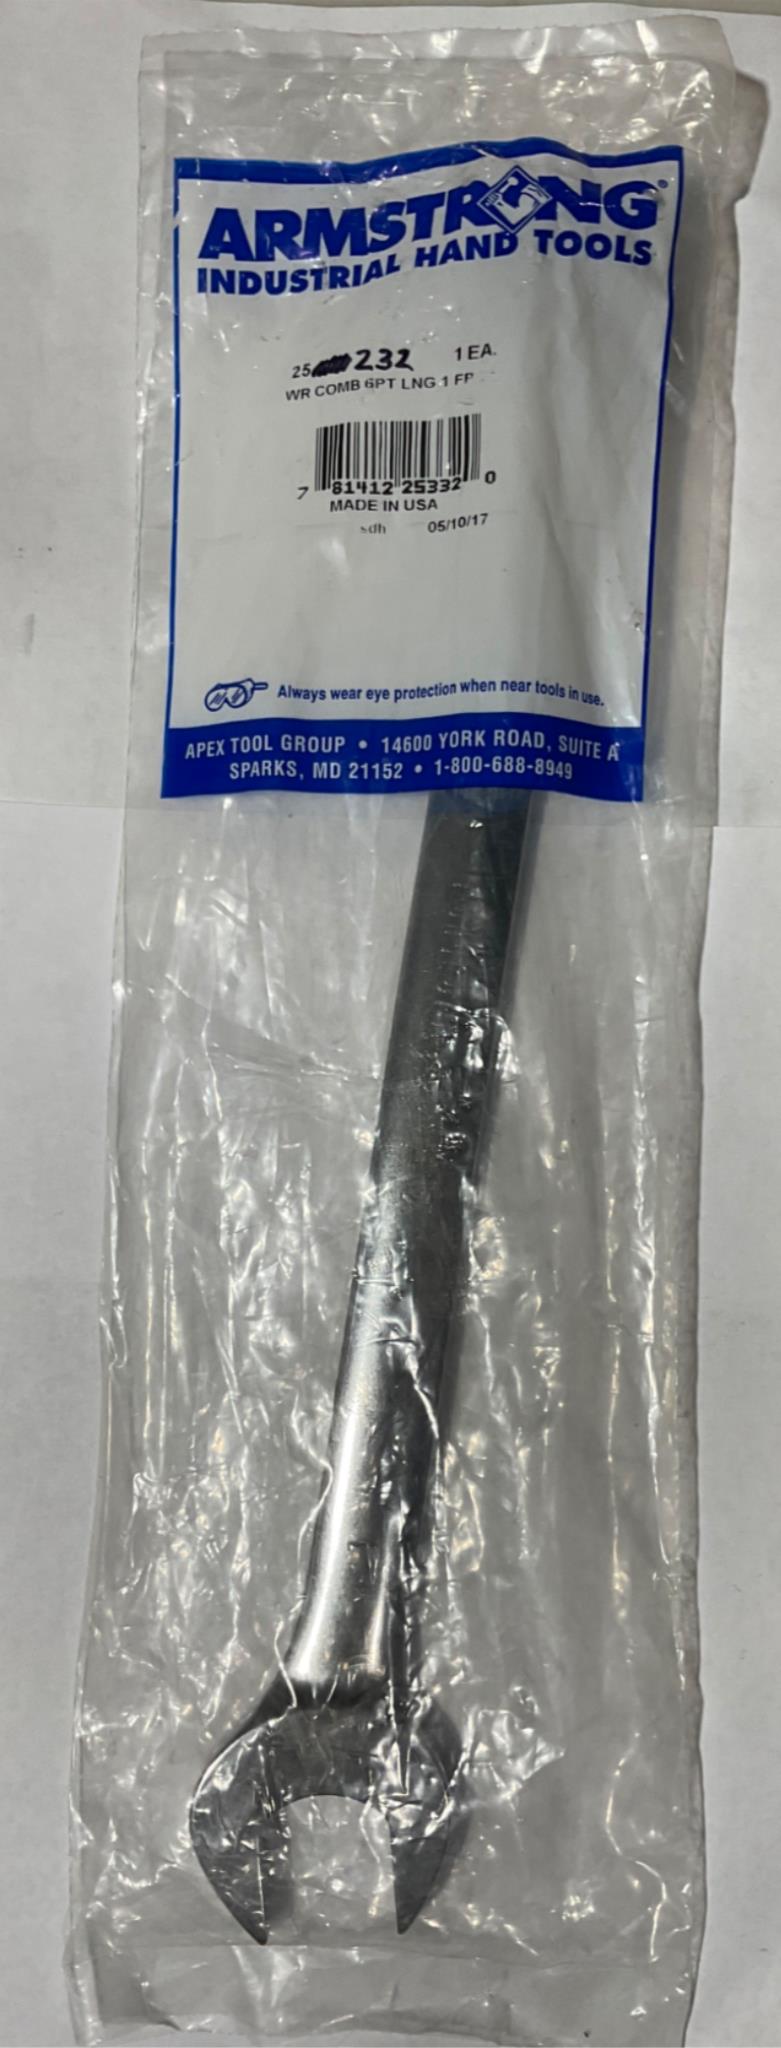 Armstrong 25-232 12 Point 1-Inch Full Polish Long Pattern Combination Wrench USA